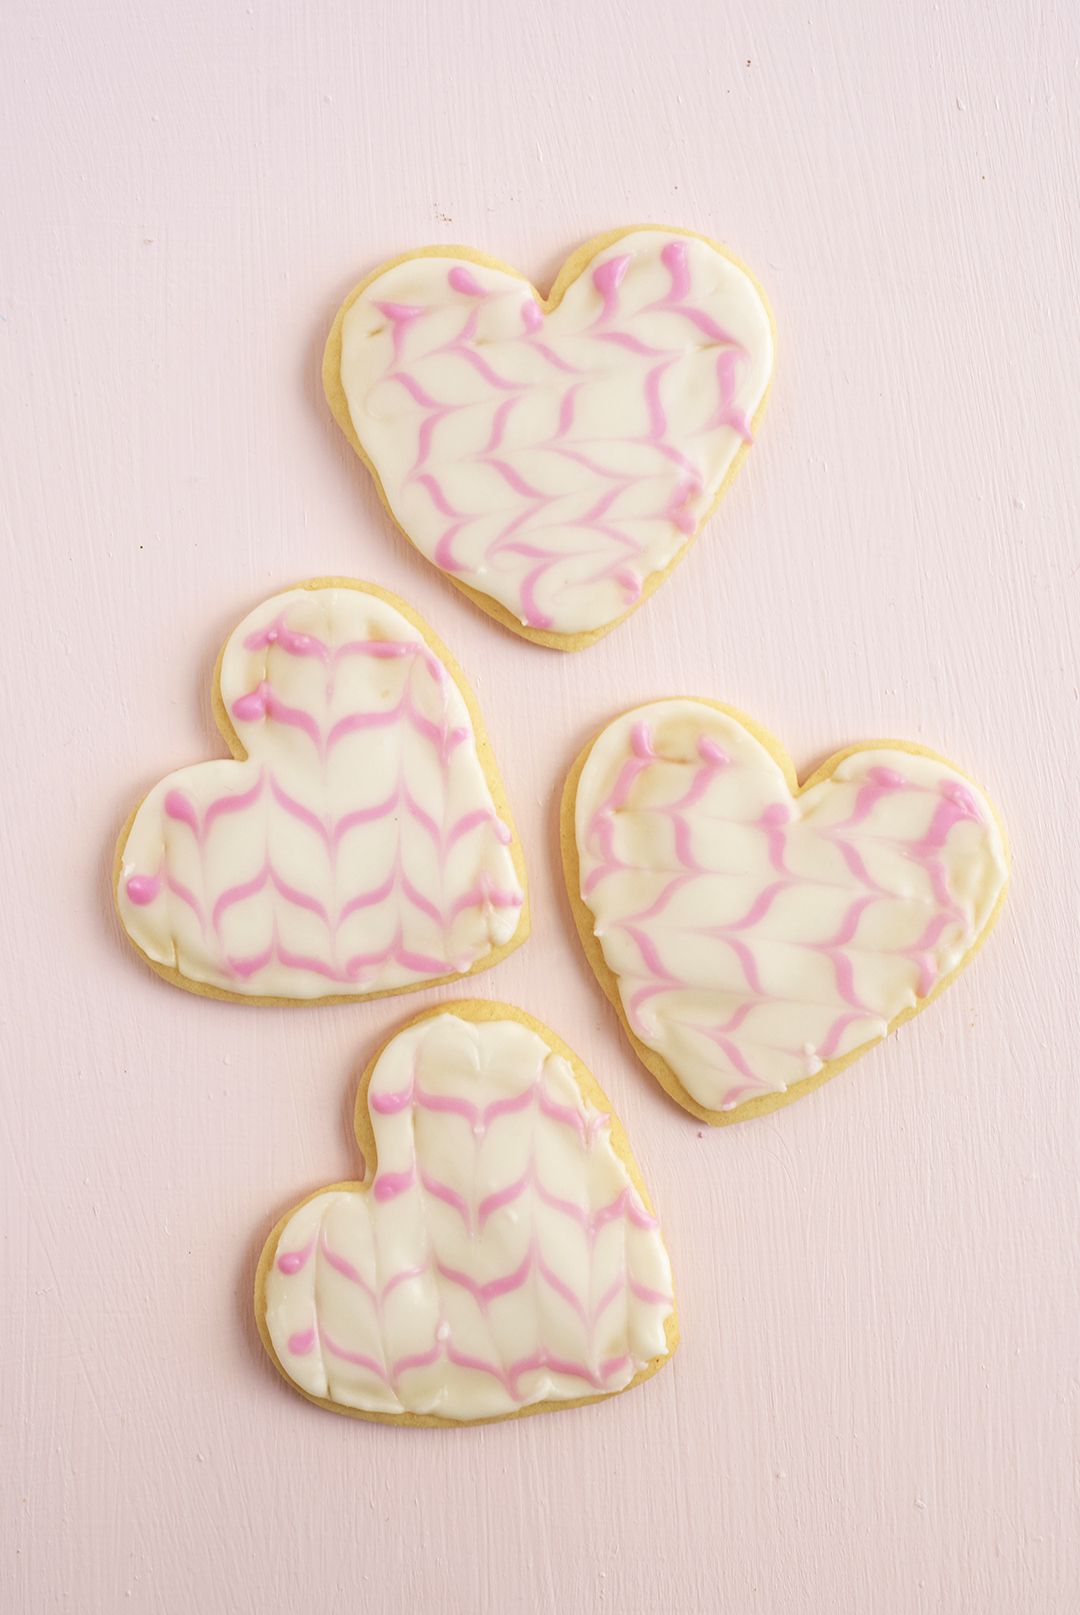 marble-effect icing on heart-shaped cookies